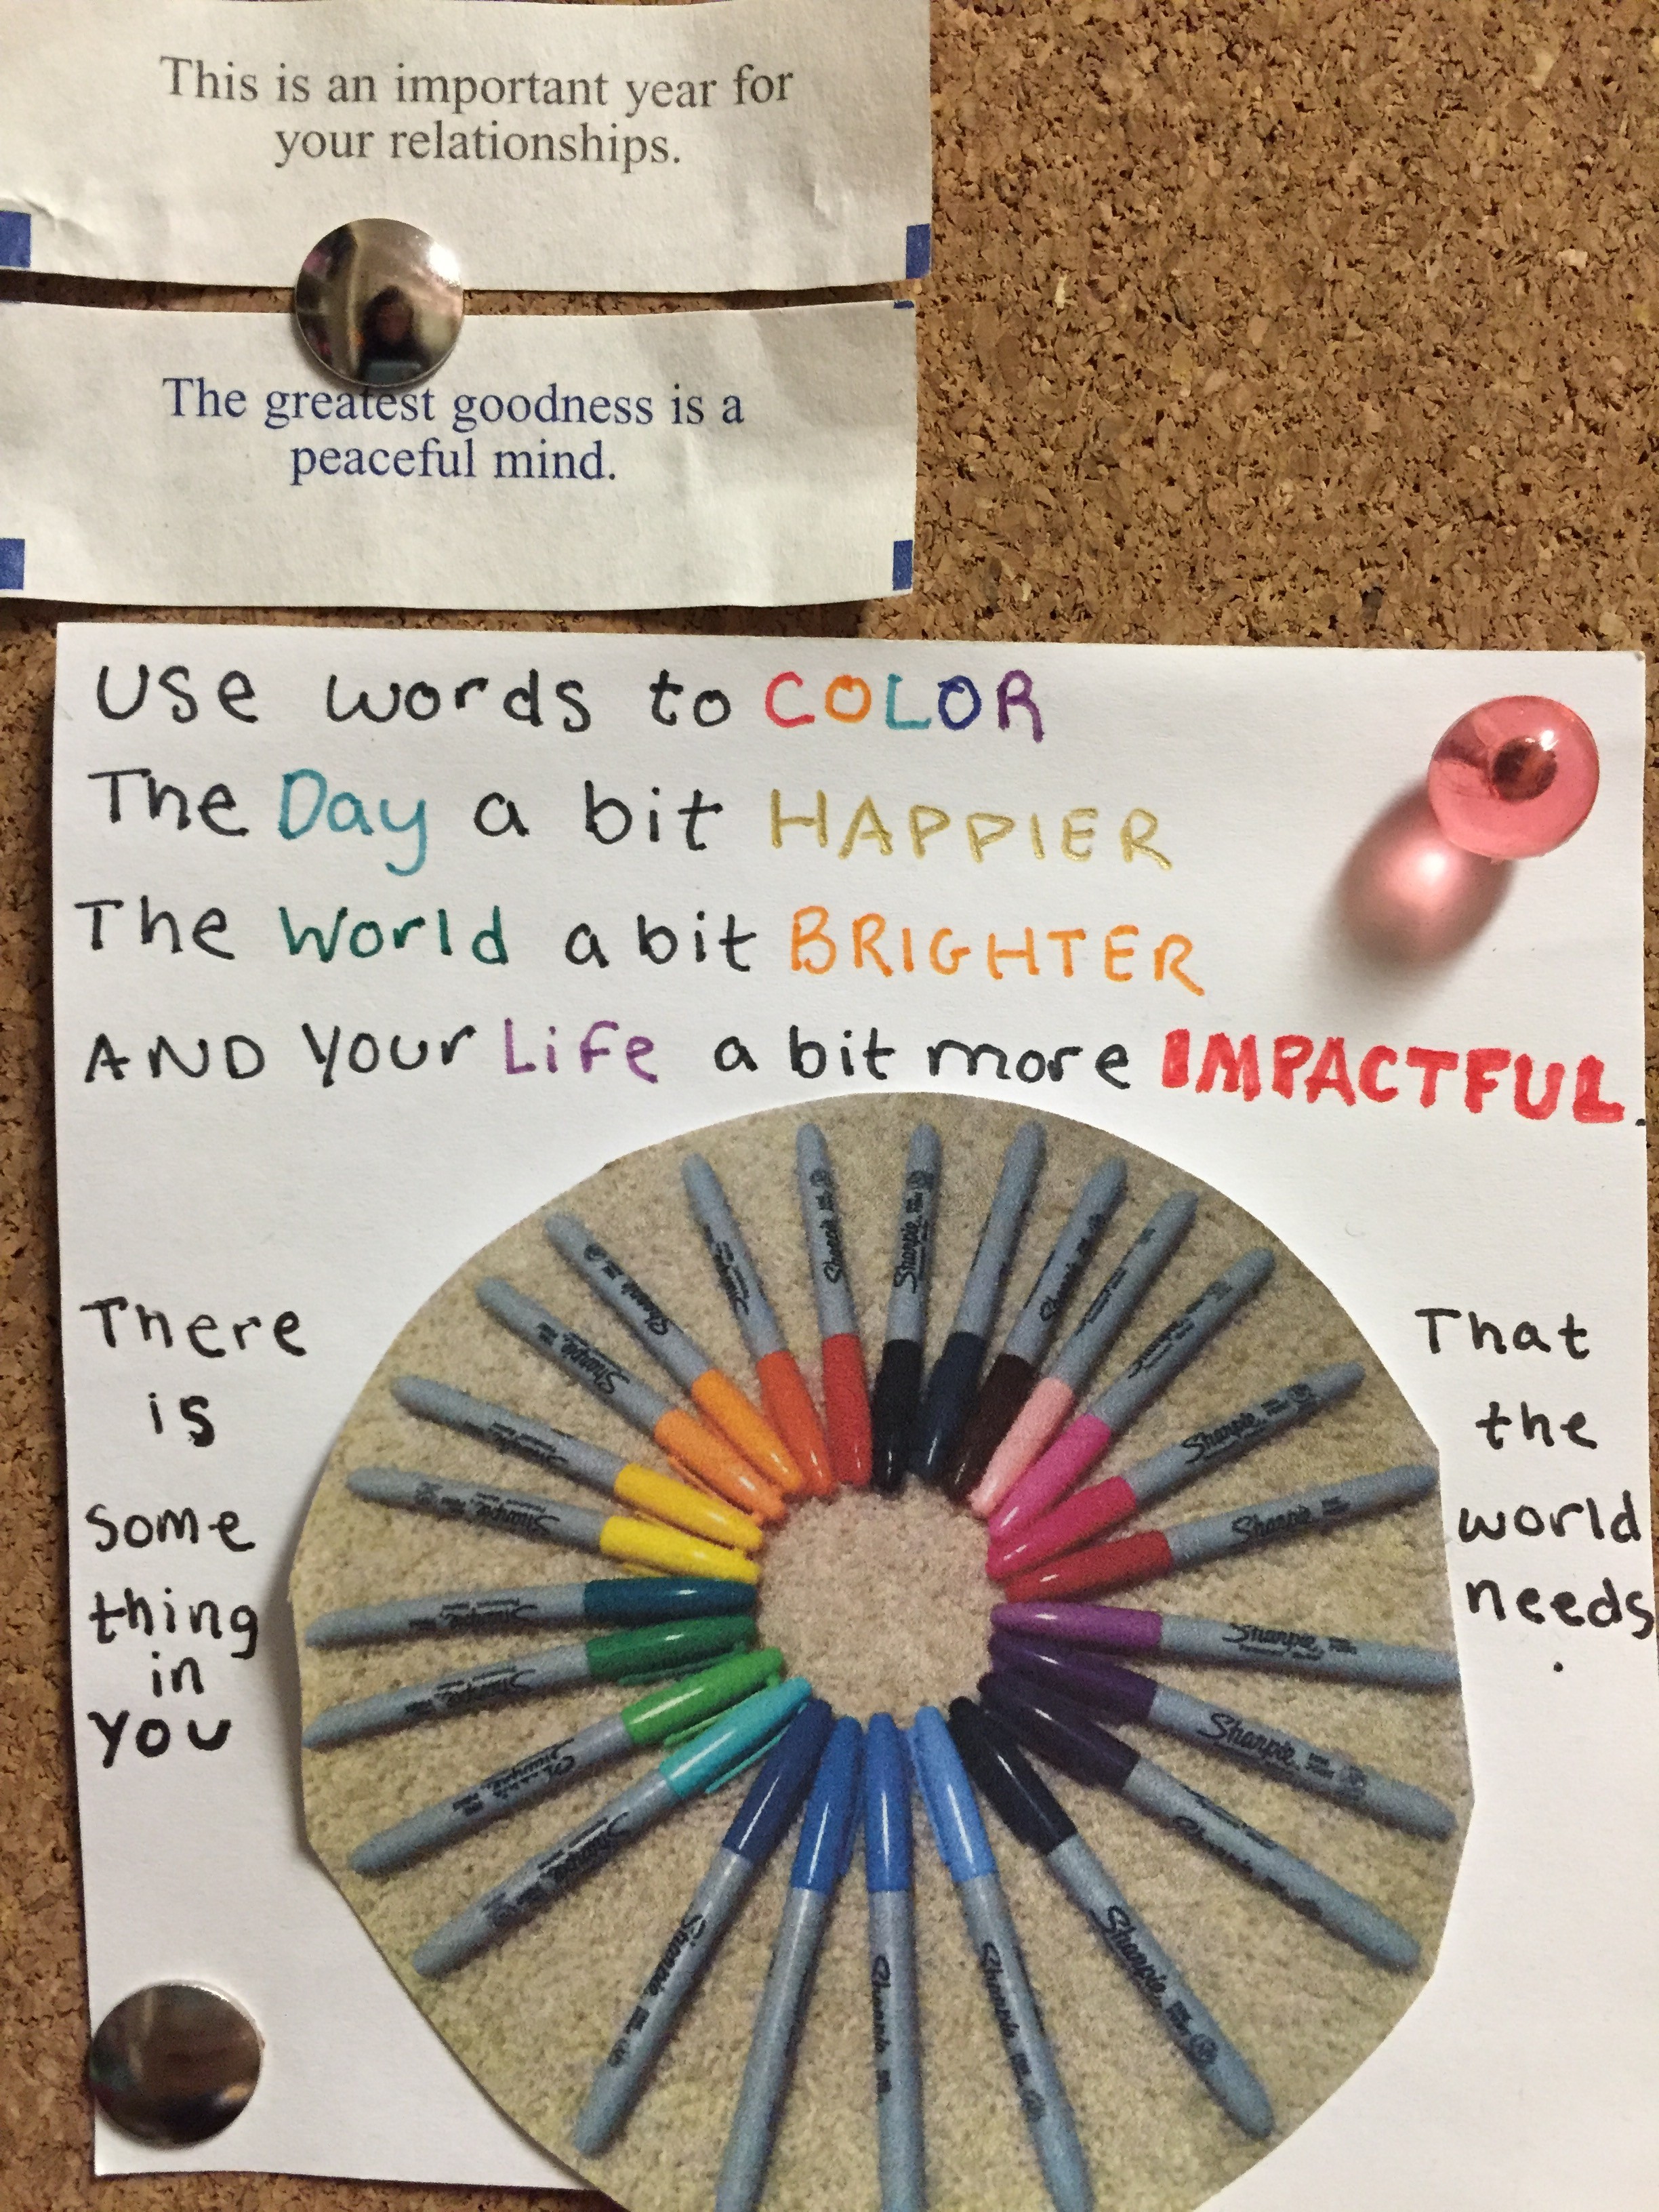 quotations around a picture of sharpies. There is something in you that the world needs.